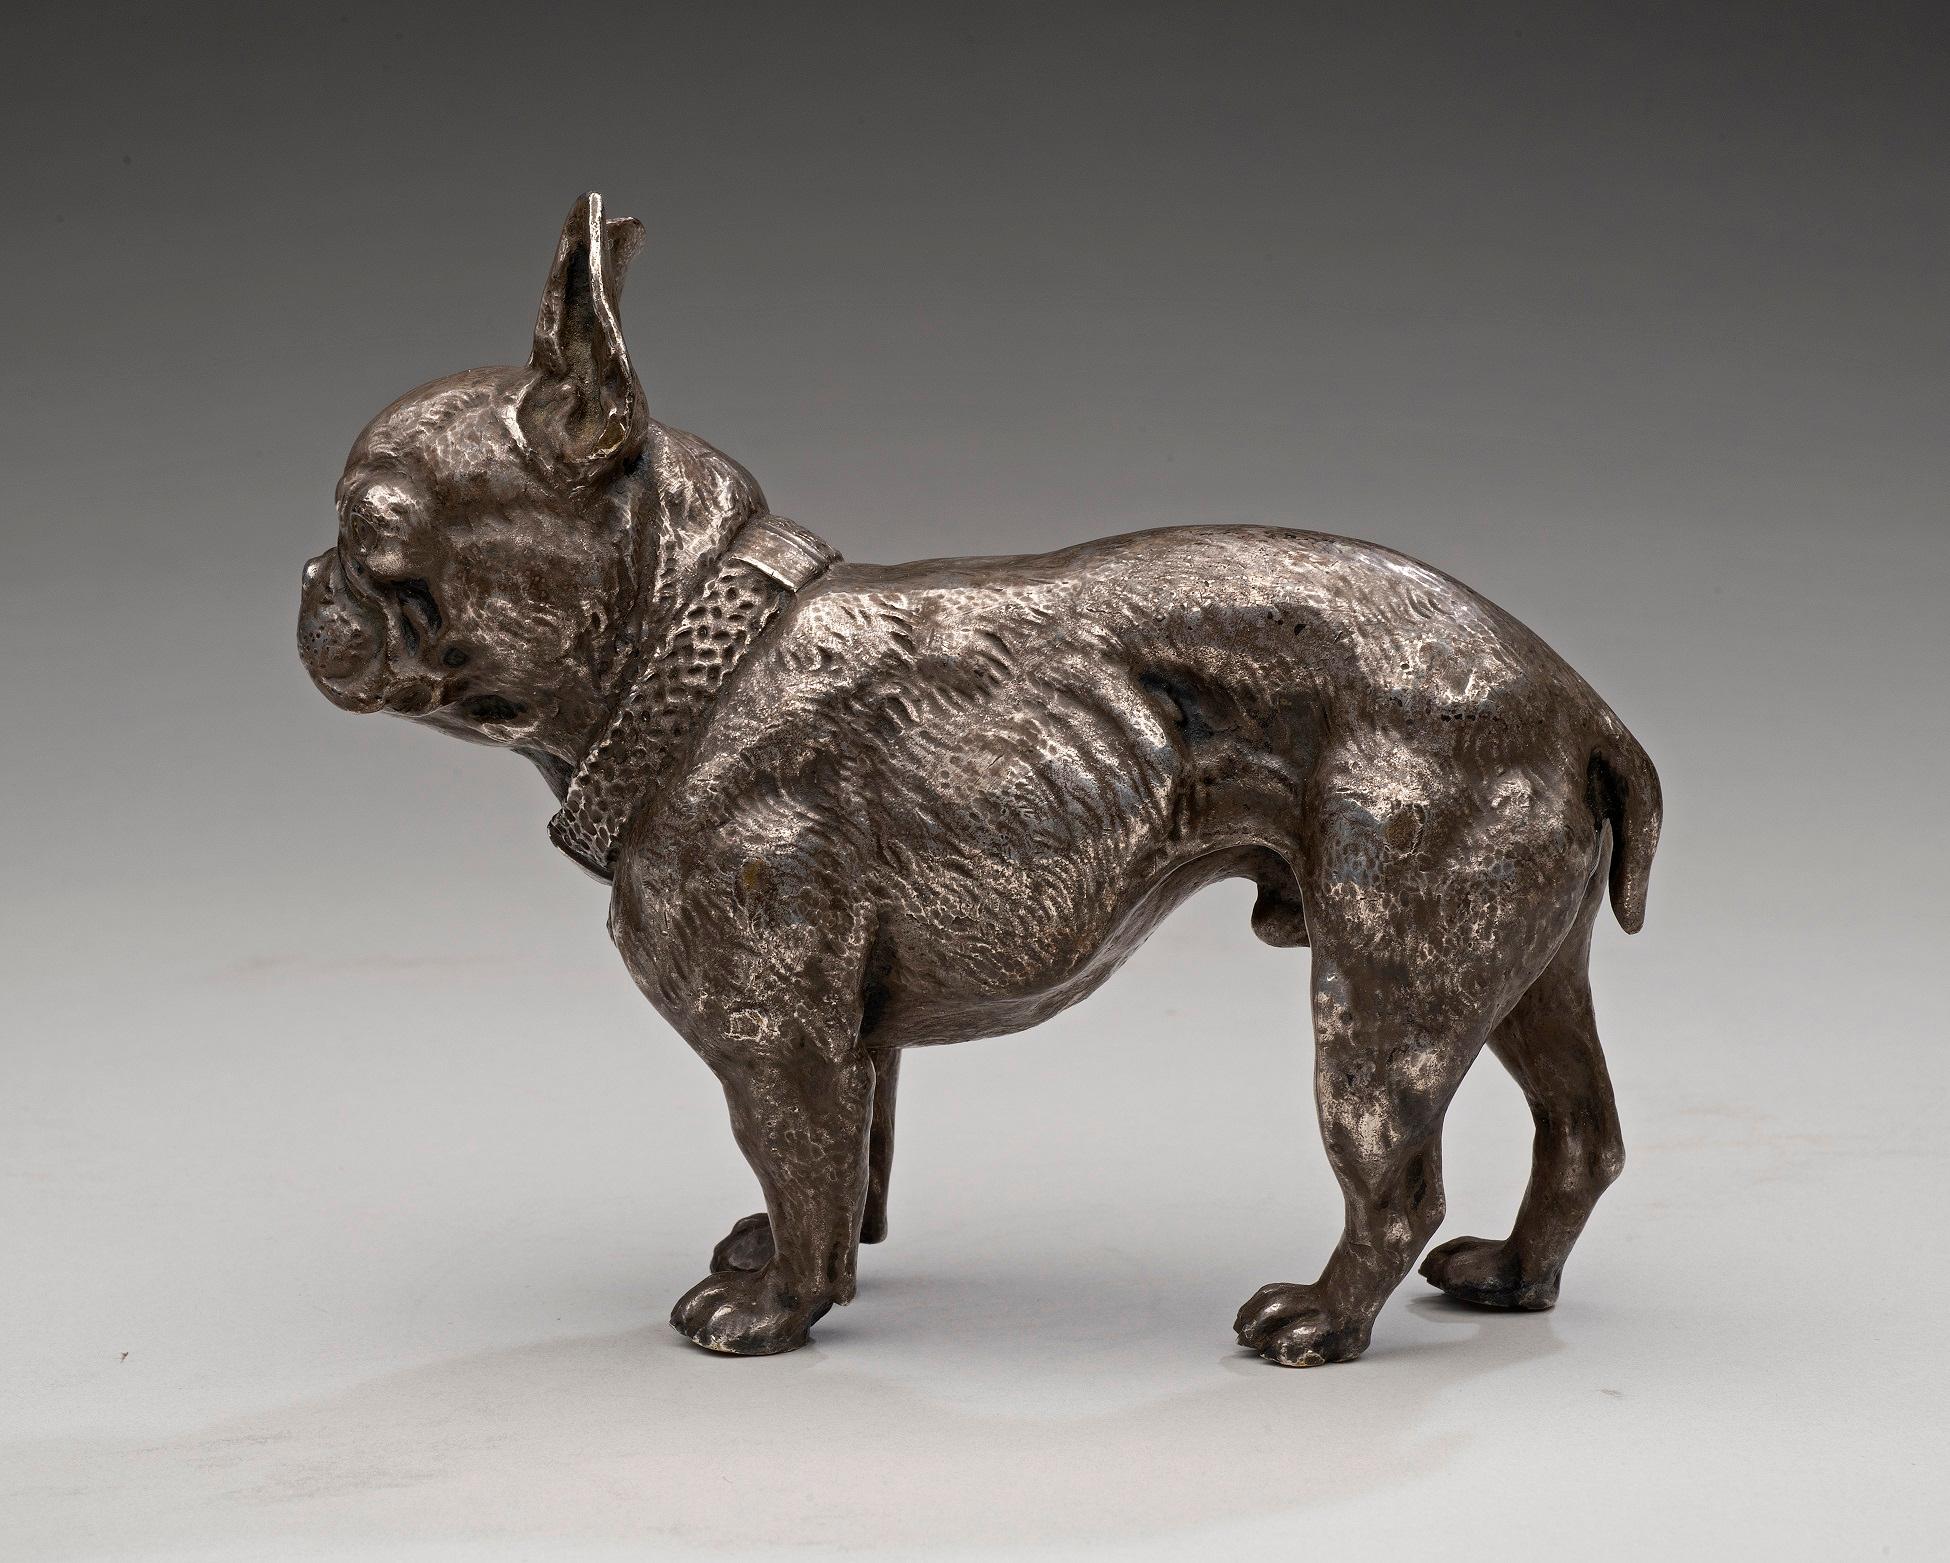 Portrait of a French Bulldog
European School, probably Austrian ca, 1890
Cast bronze with silver plating
4 1/2 x 5 1/2 inches

This highly naturalistic bronze and silver casting was undoubtedly executed as an actual portrait of a beloved family